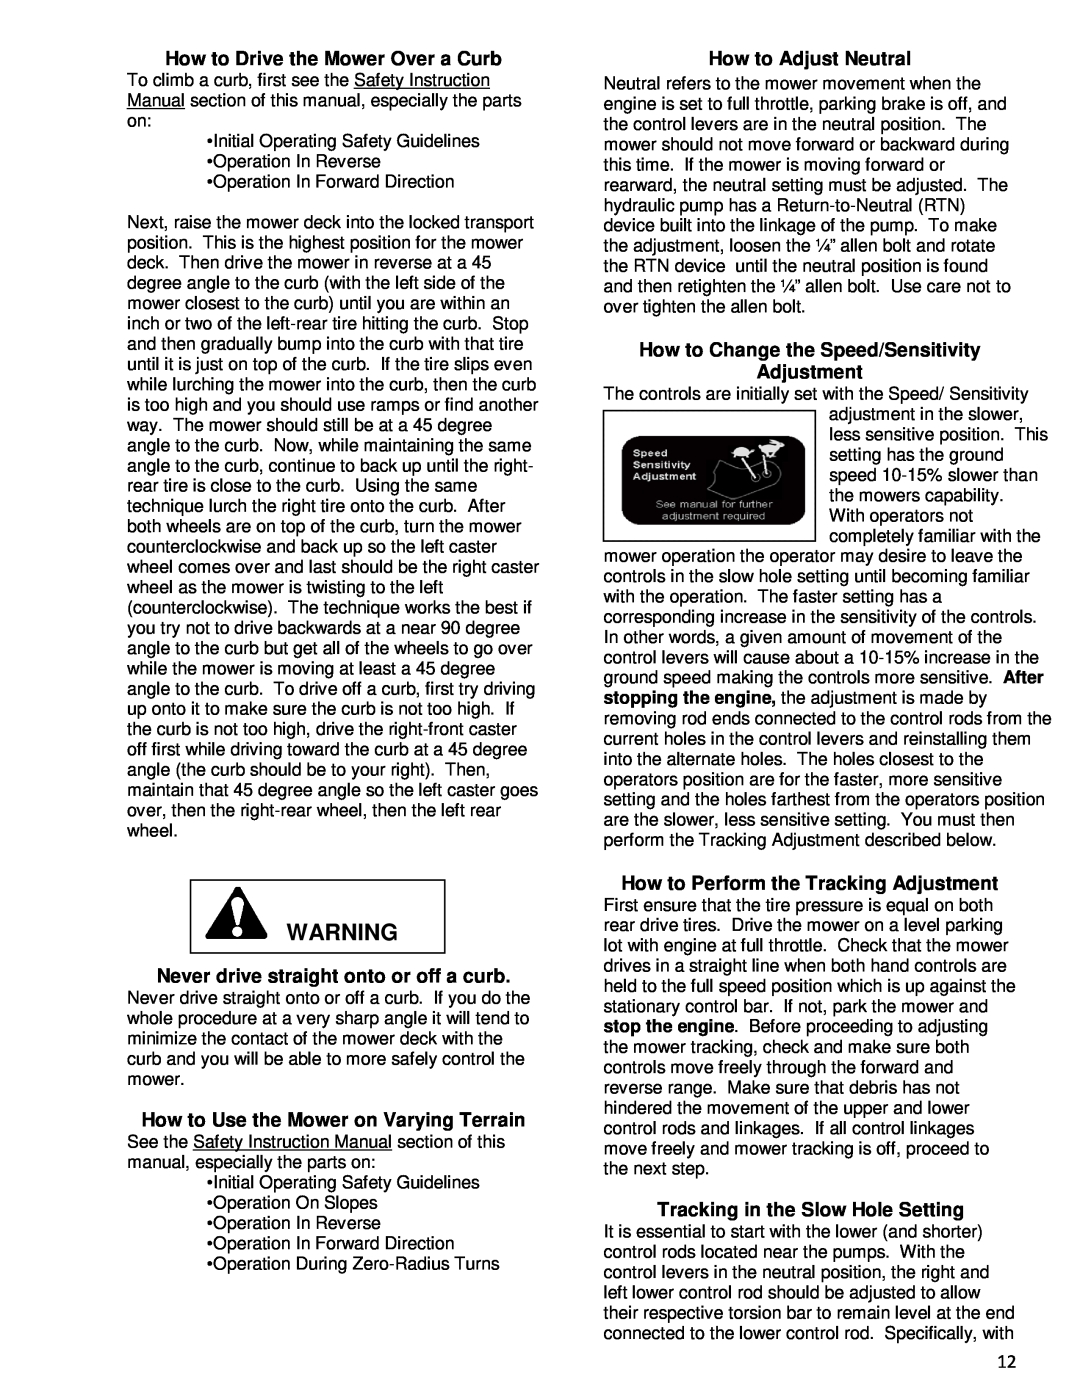 Wright Manufacturing 43181 owner manual How to Drive the Mower Over a Curb, Never drive straight onto or off a curb 